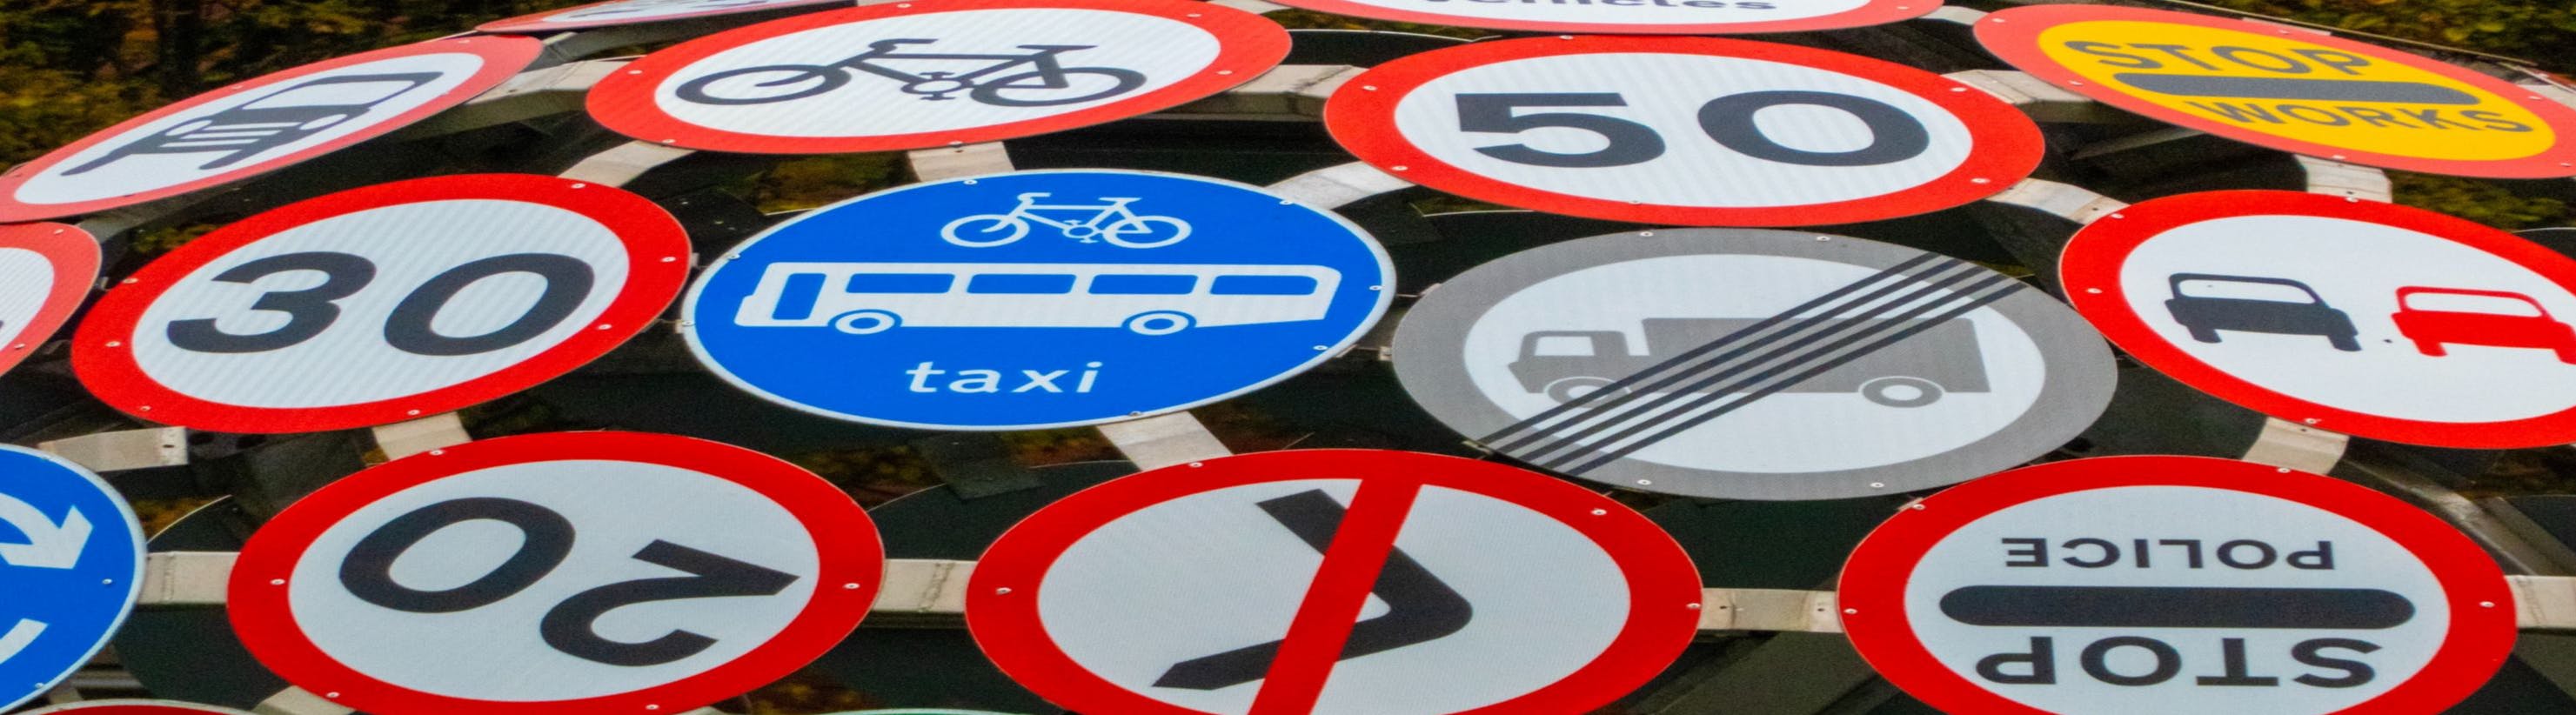 Photo of various traffic signs.